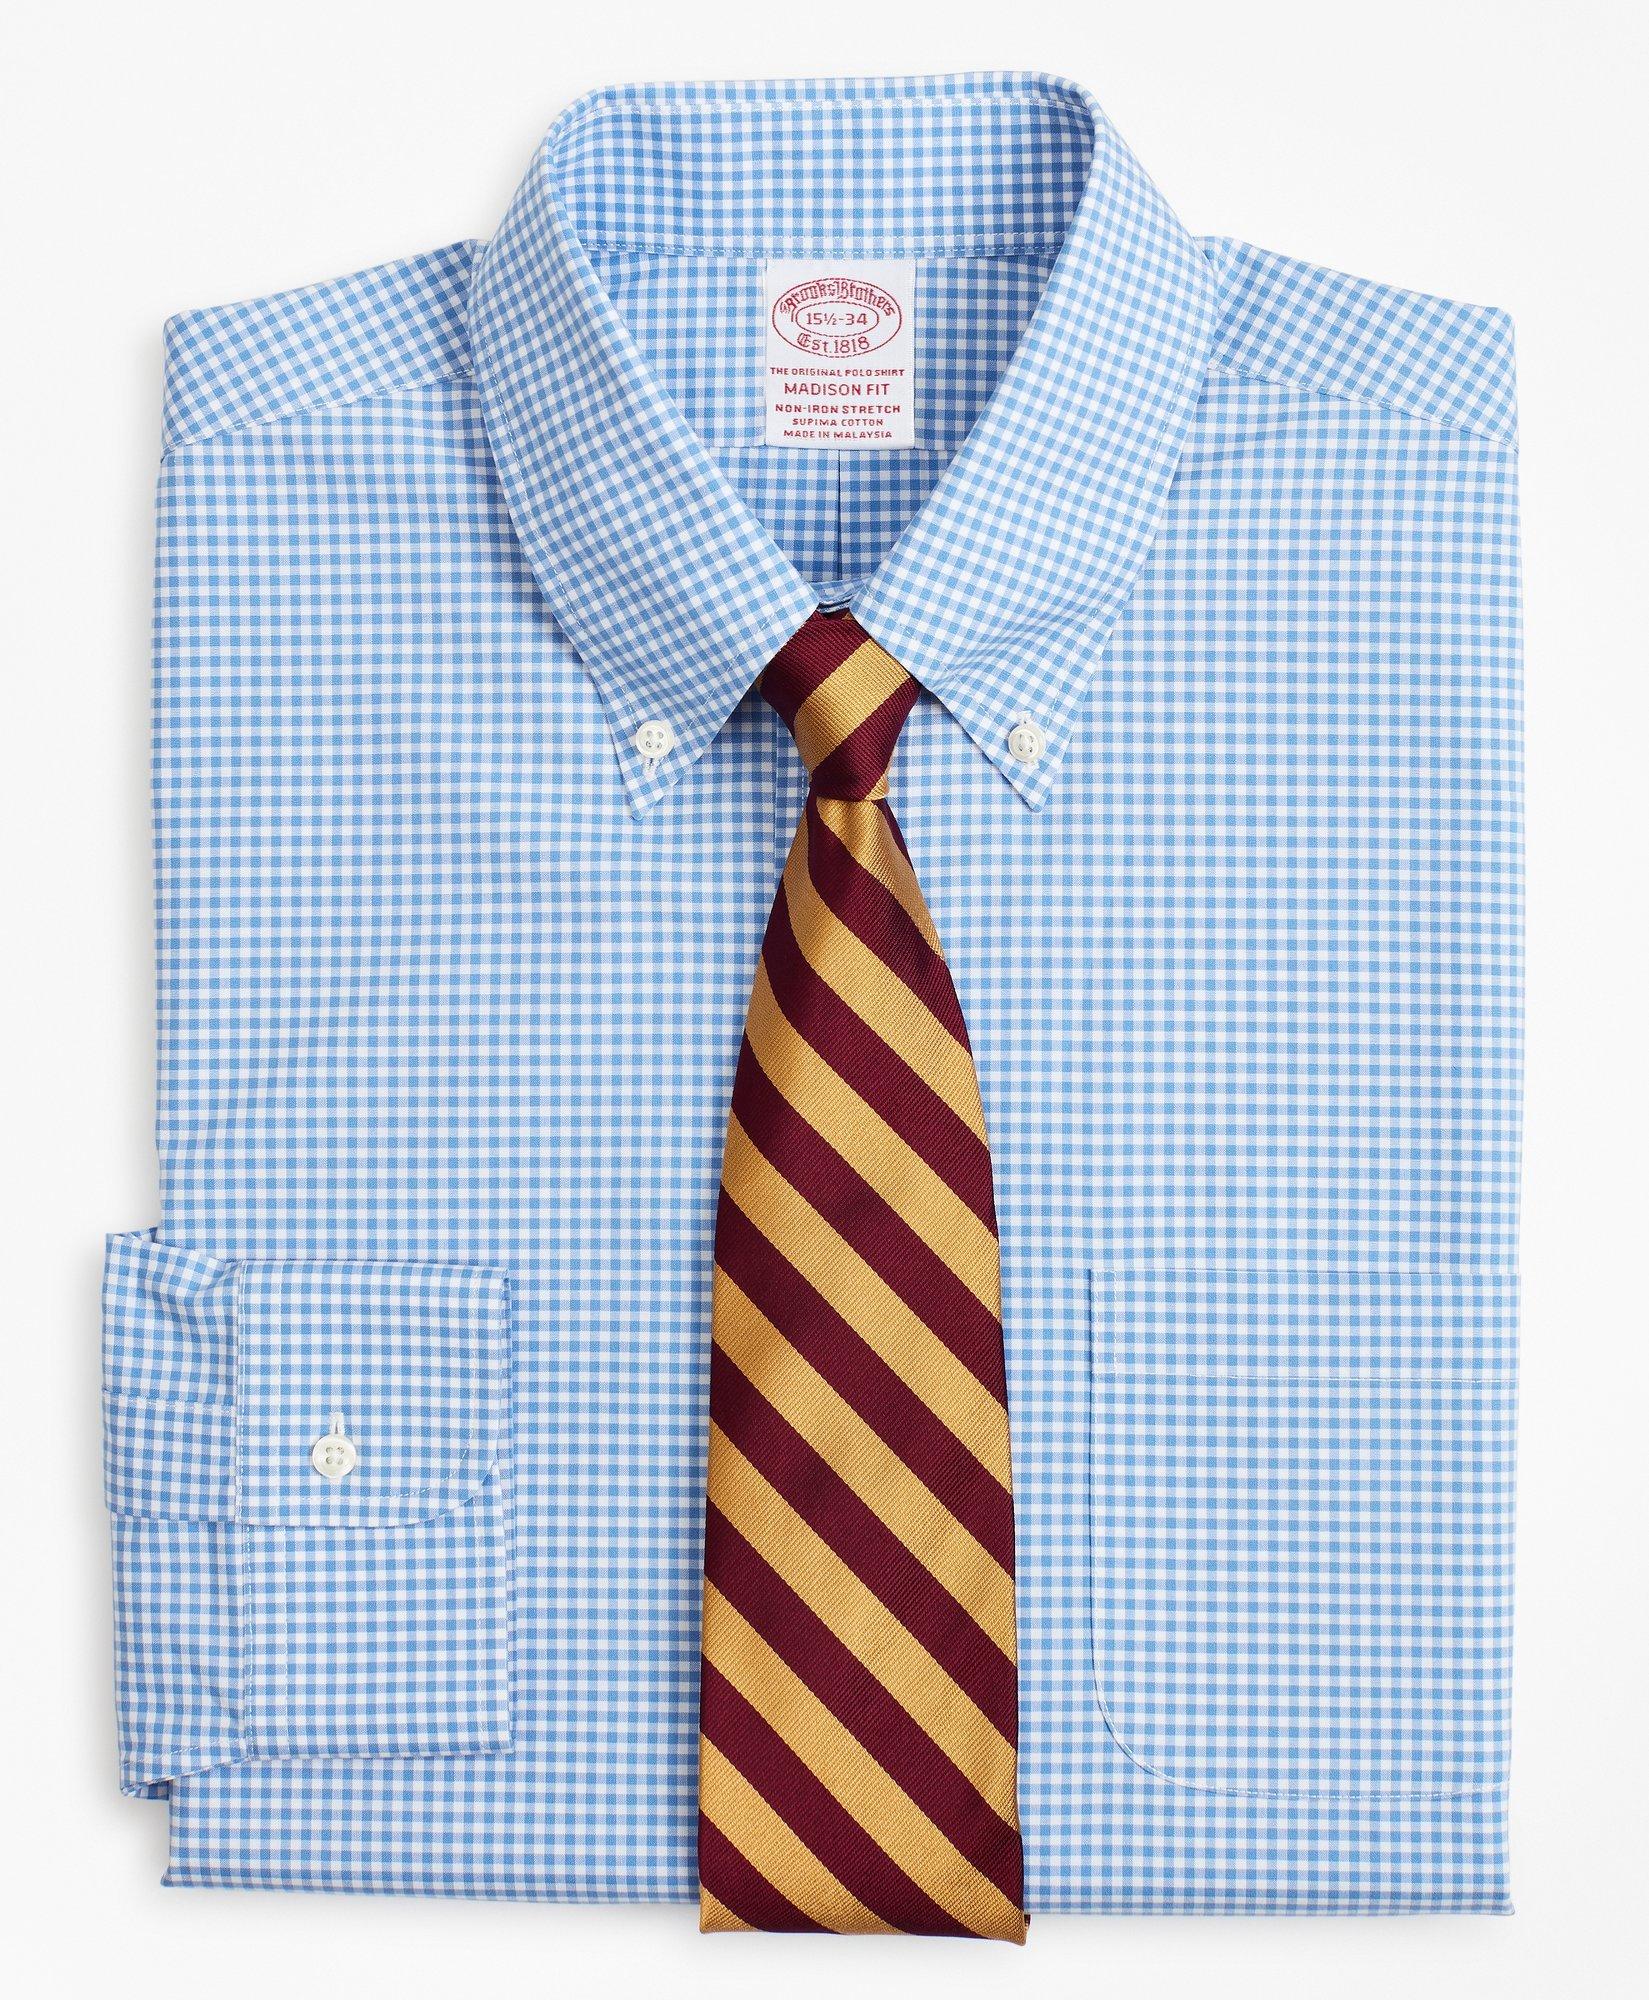 Stretch Madison Relaxed-Fit Dress Shirt, Non-Iron Poplin Button-Down ...